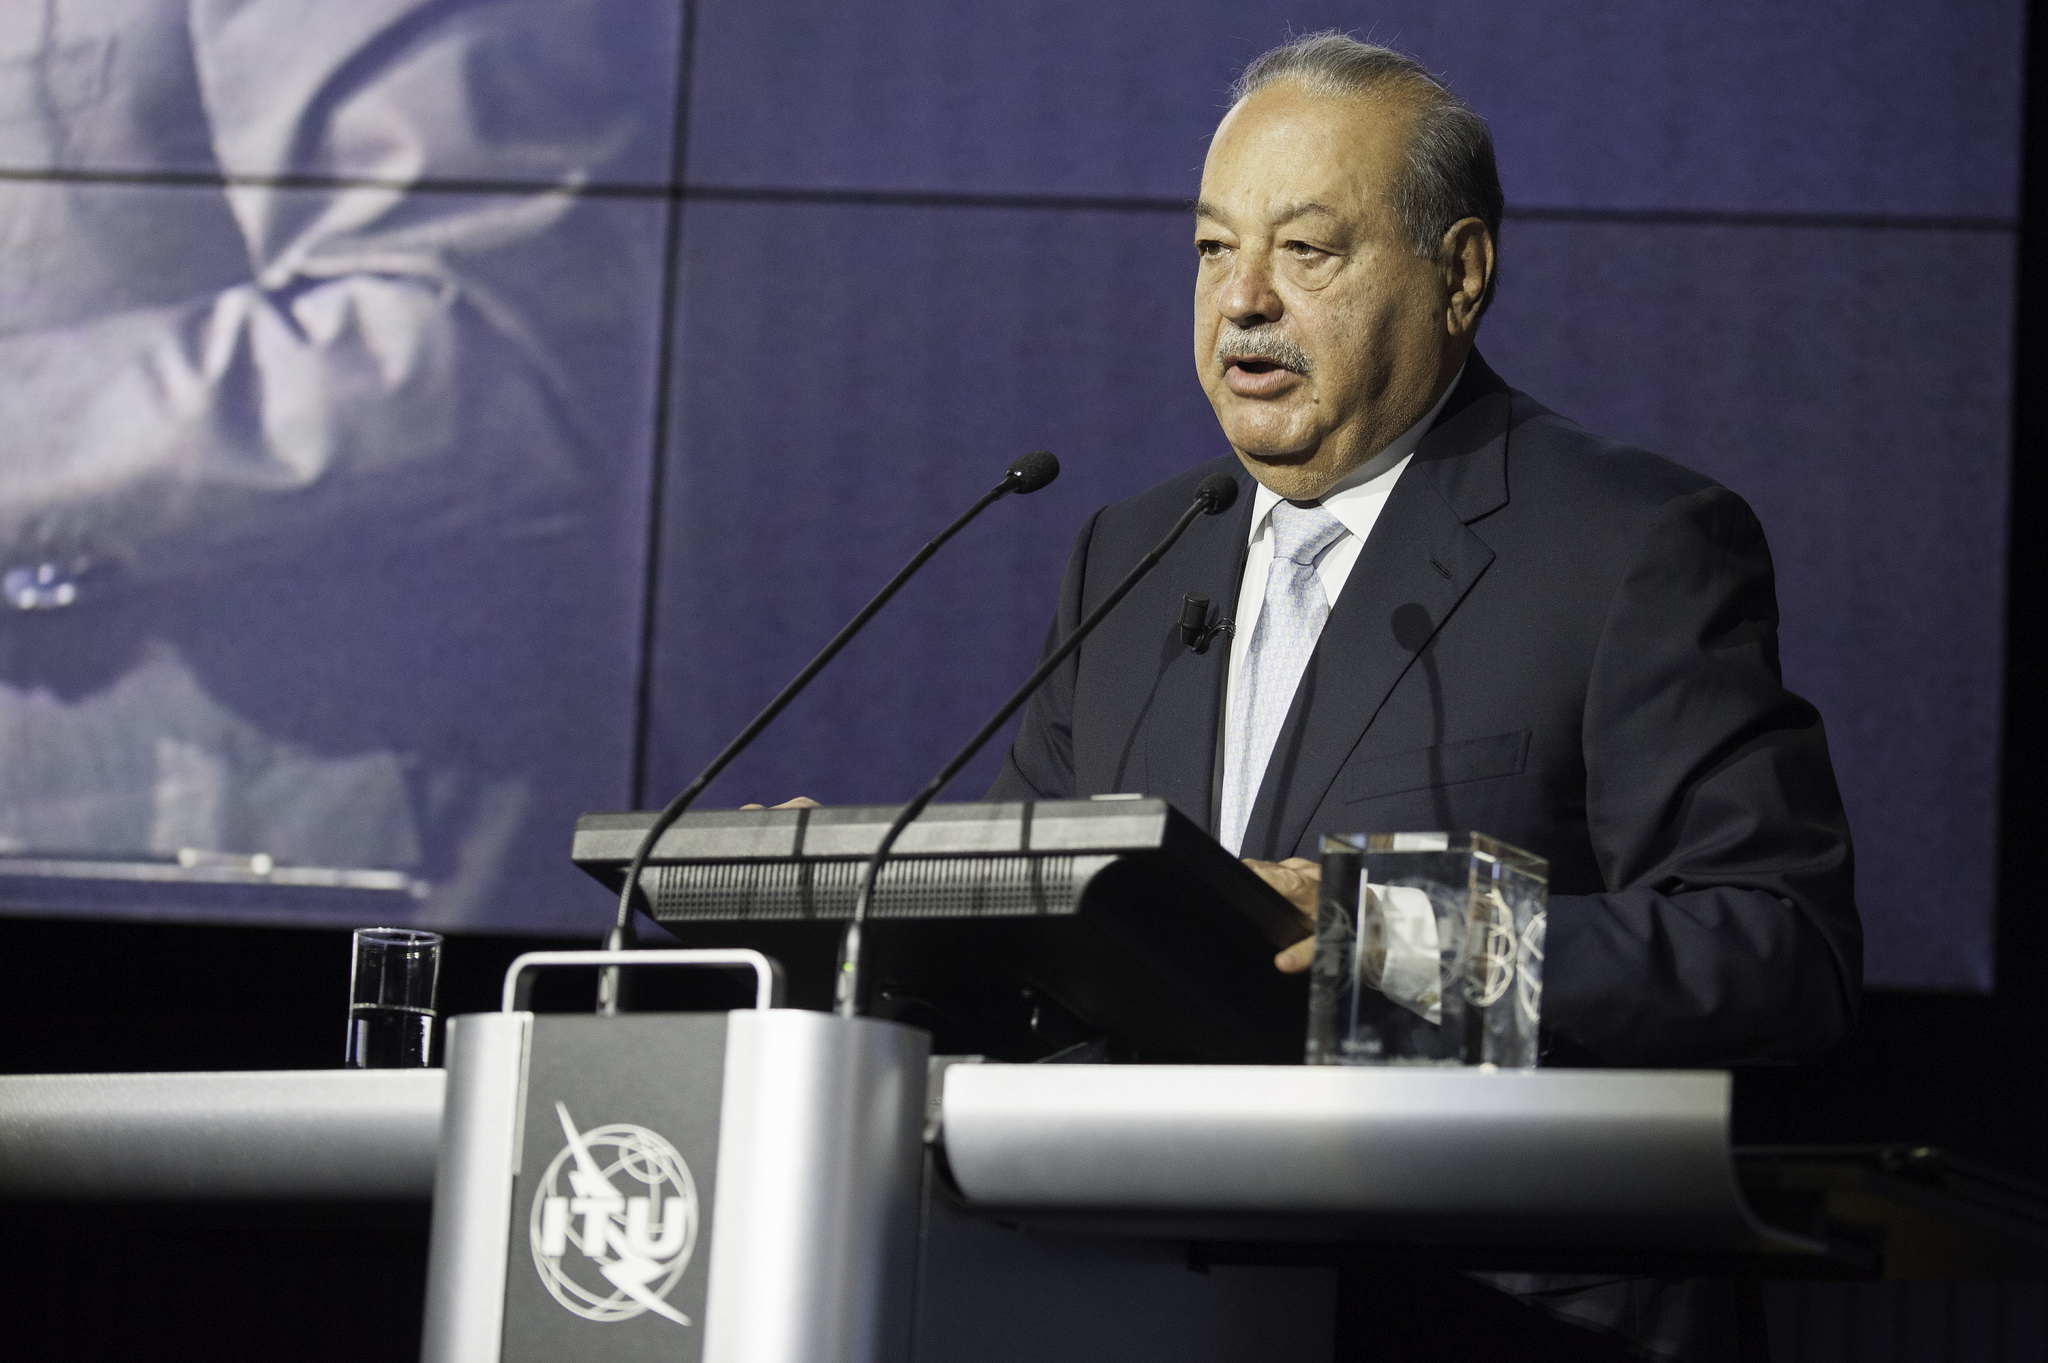 ITU Pictures, Flickr. President, Carlos Slim Foundation and Chairman, Grupo Carso speaking at the WTISD 2014 Award Ceremony.